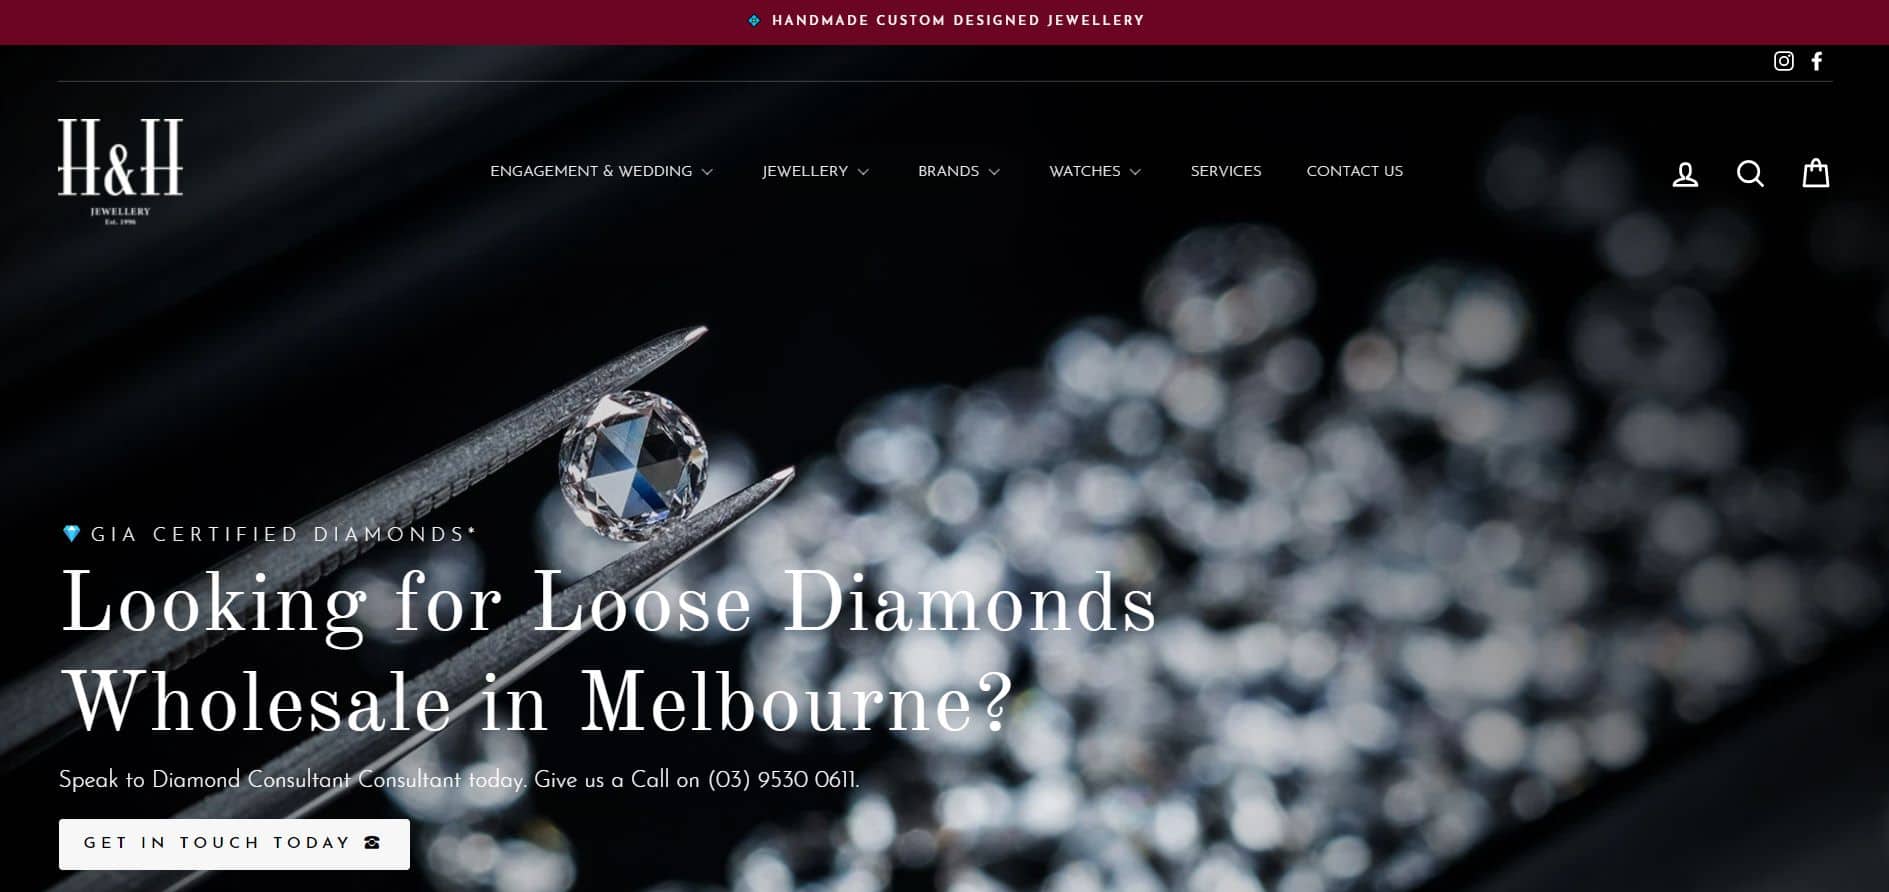 h&h jewellery stores melbourne